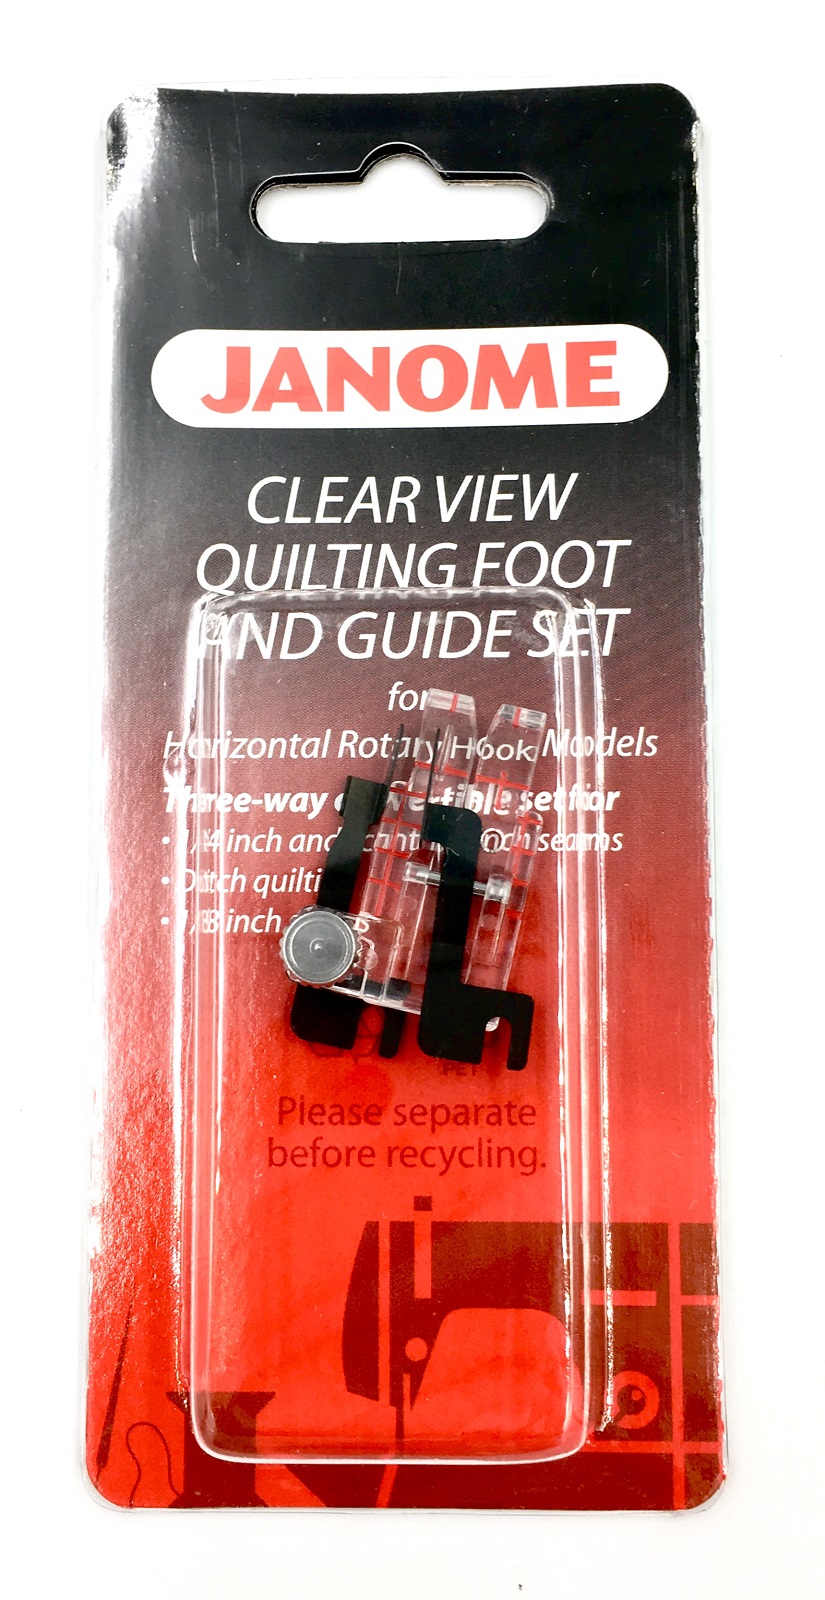 Clear View Quilting Foot & Guide Set - 200449001